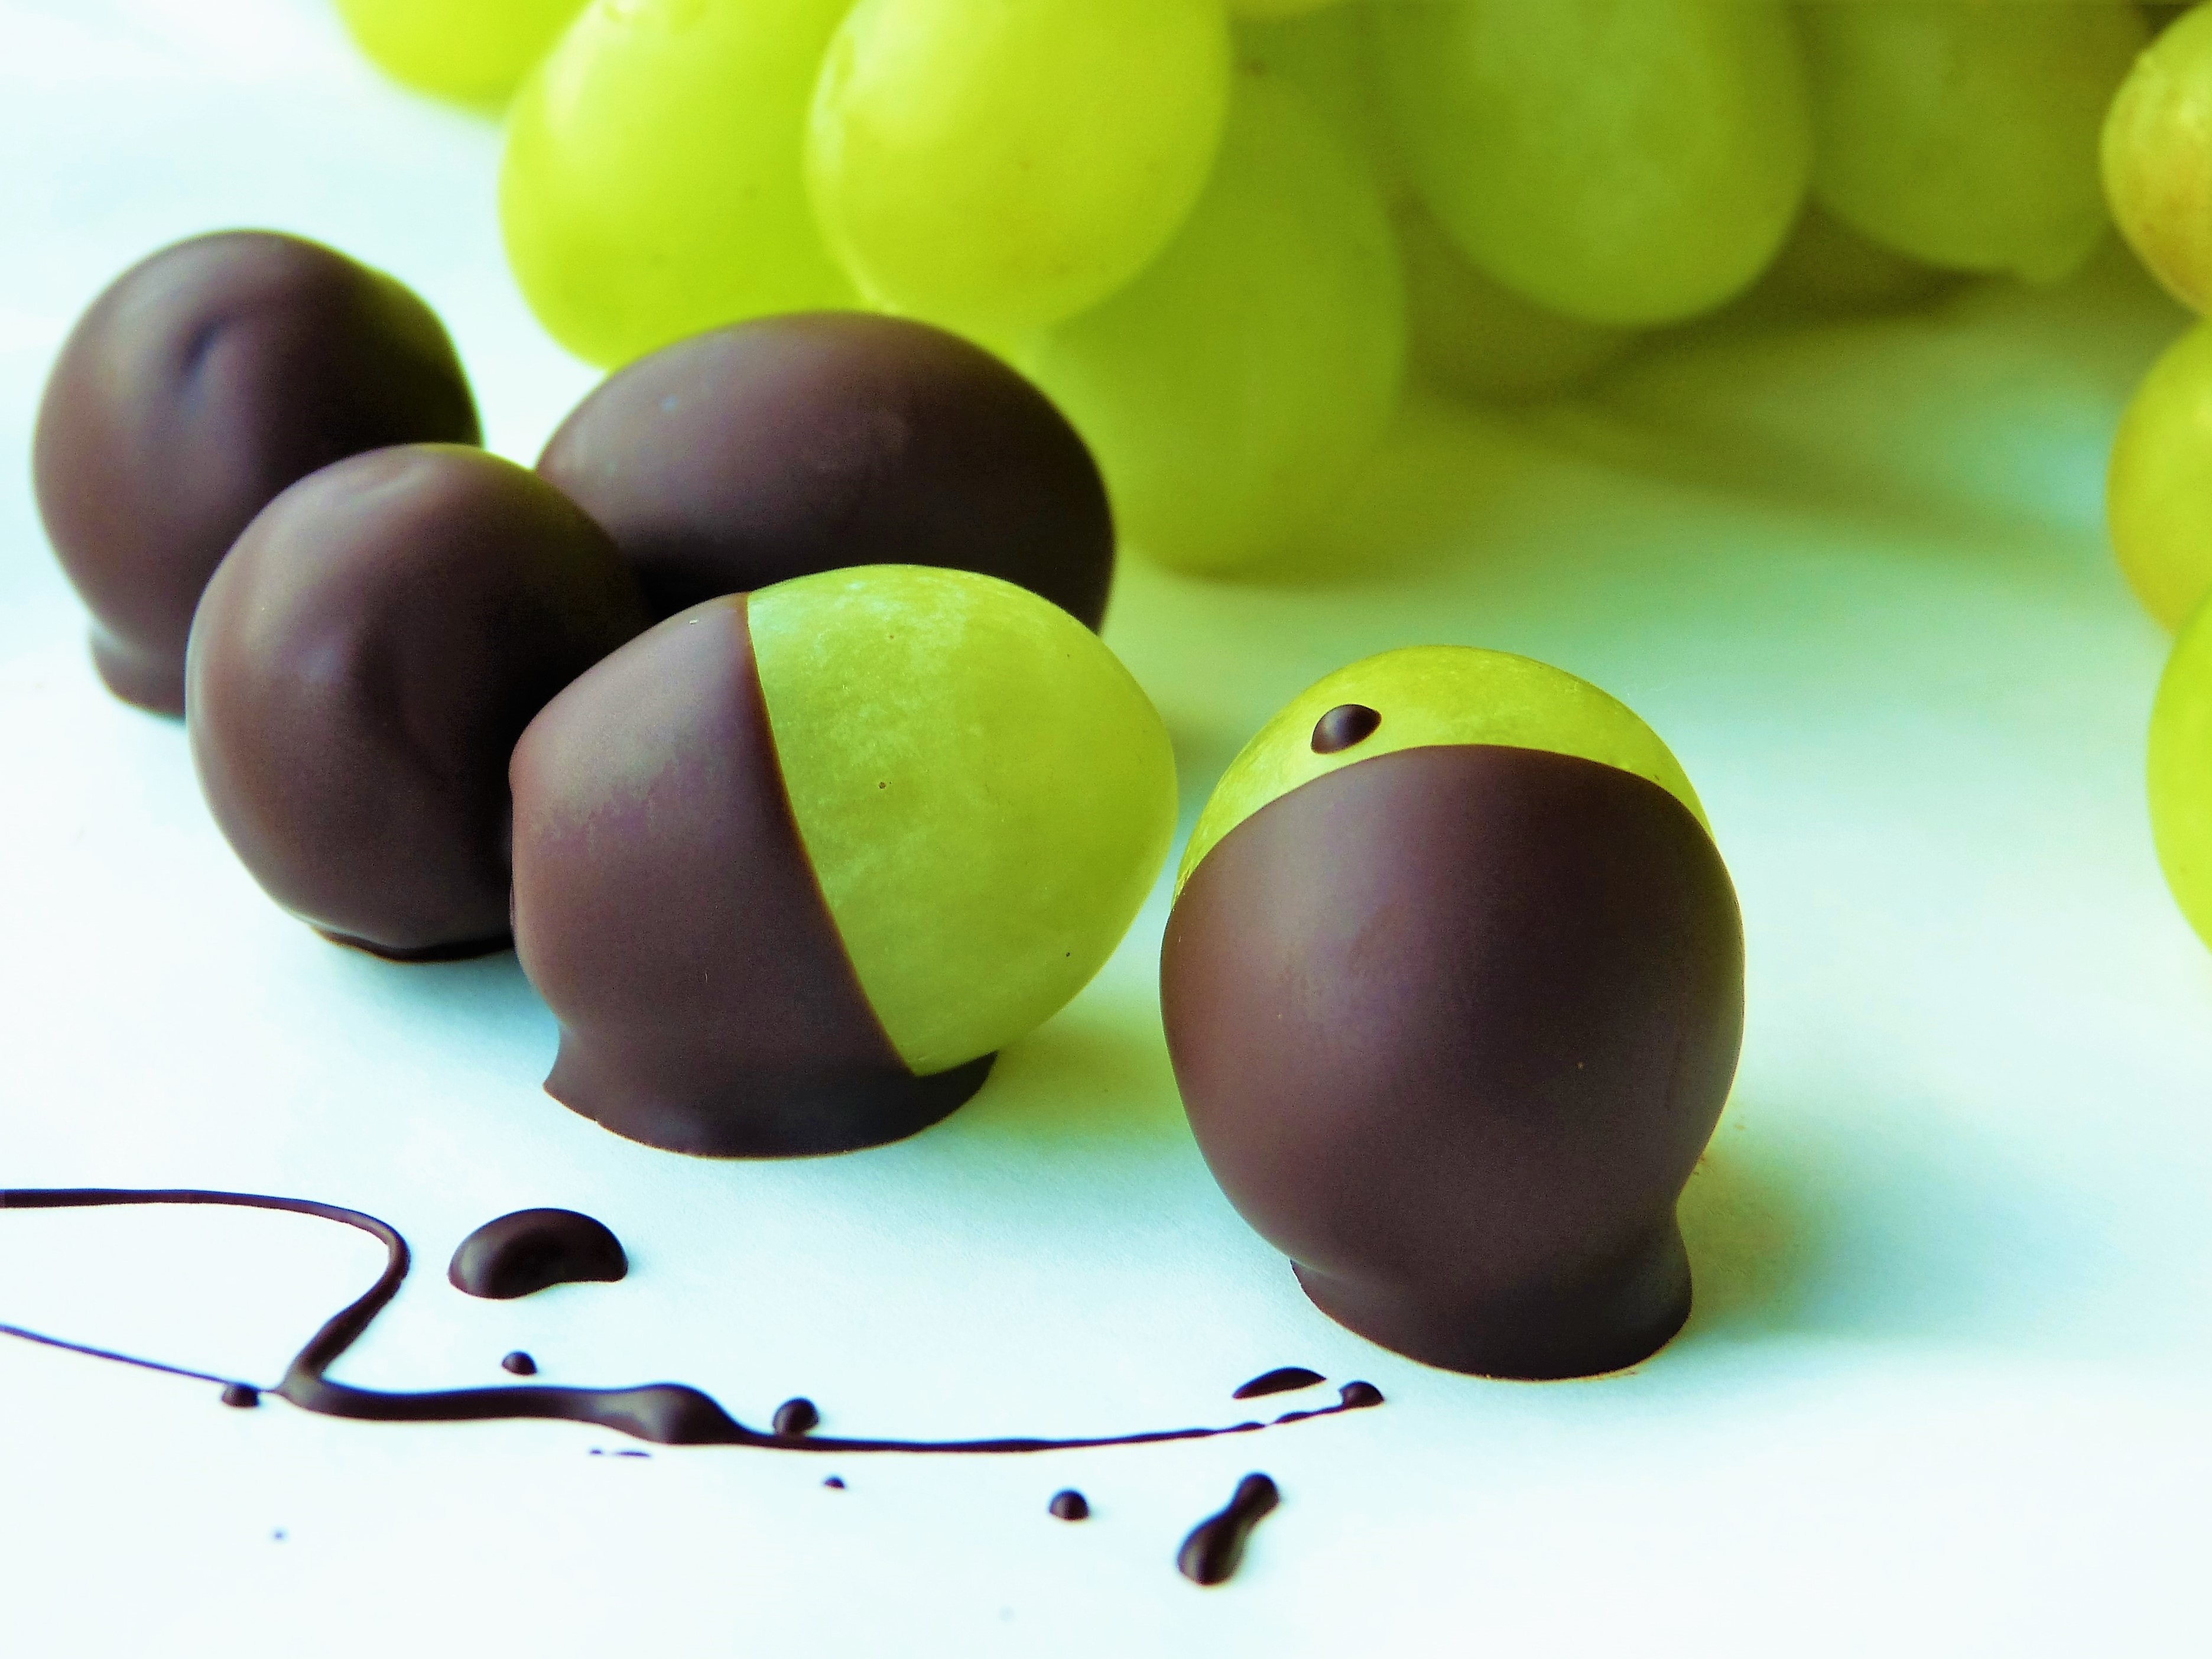 146900 download wallpaper chocolate, food, grapes, desert, glaze screensavers and pictures for free